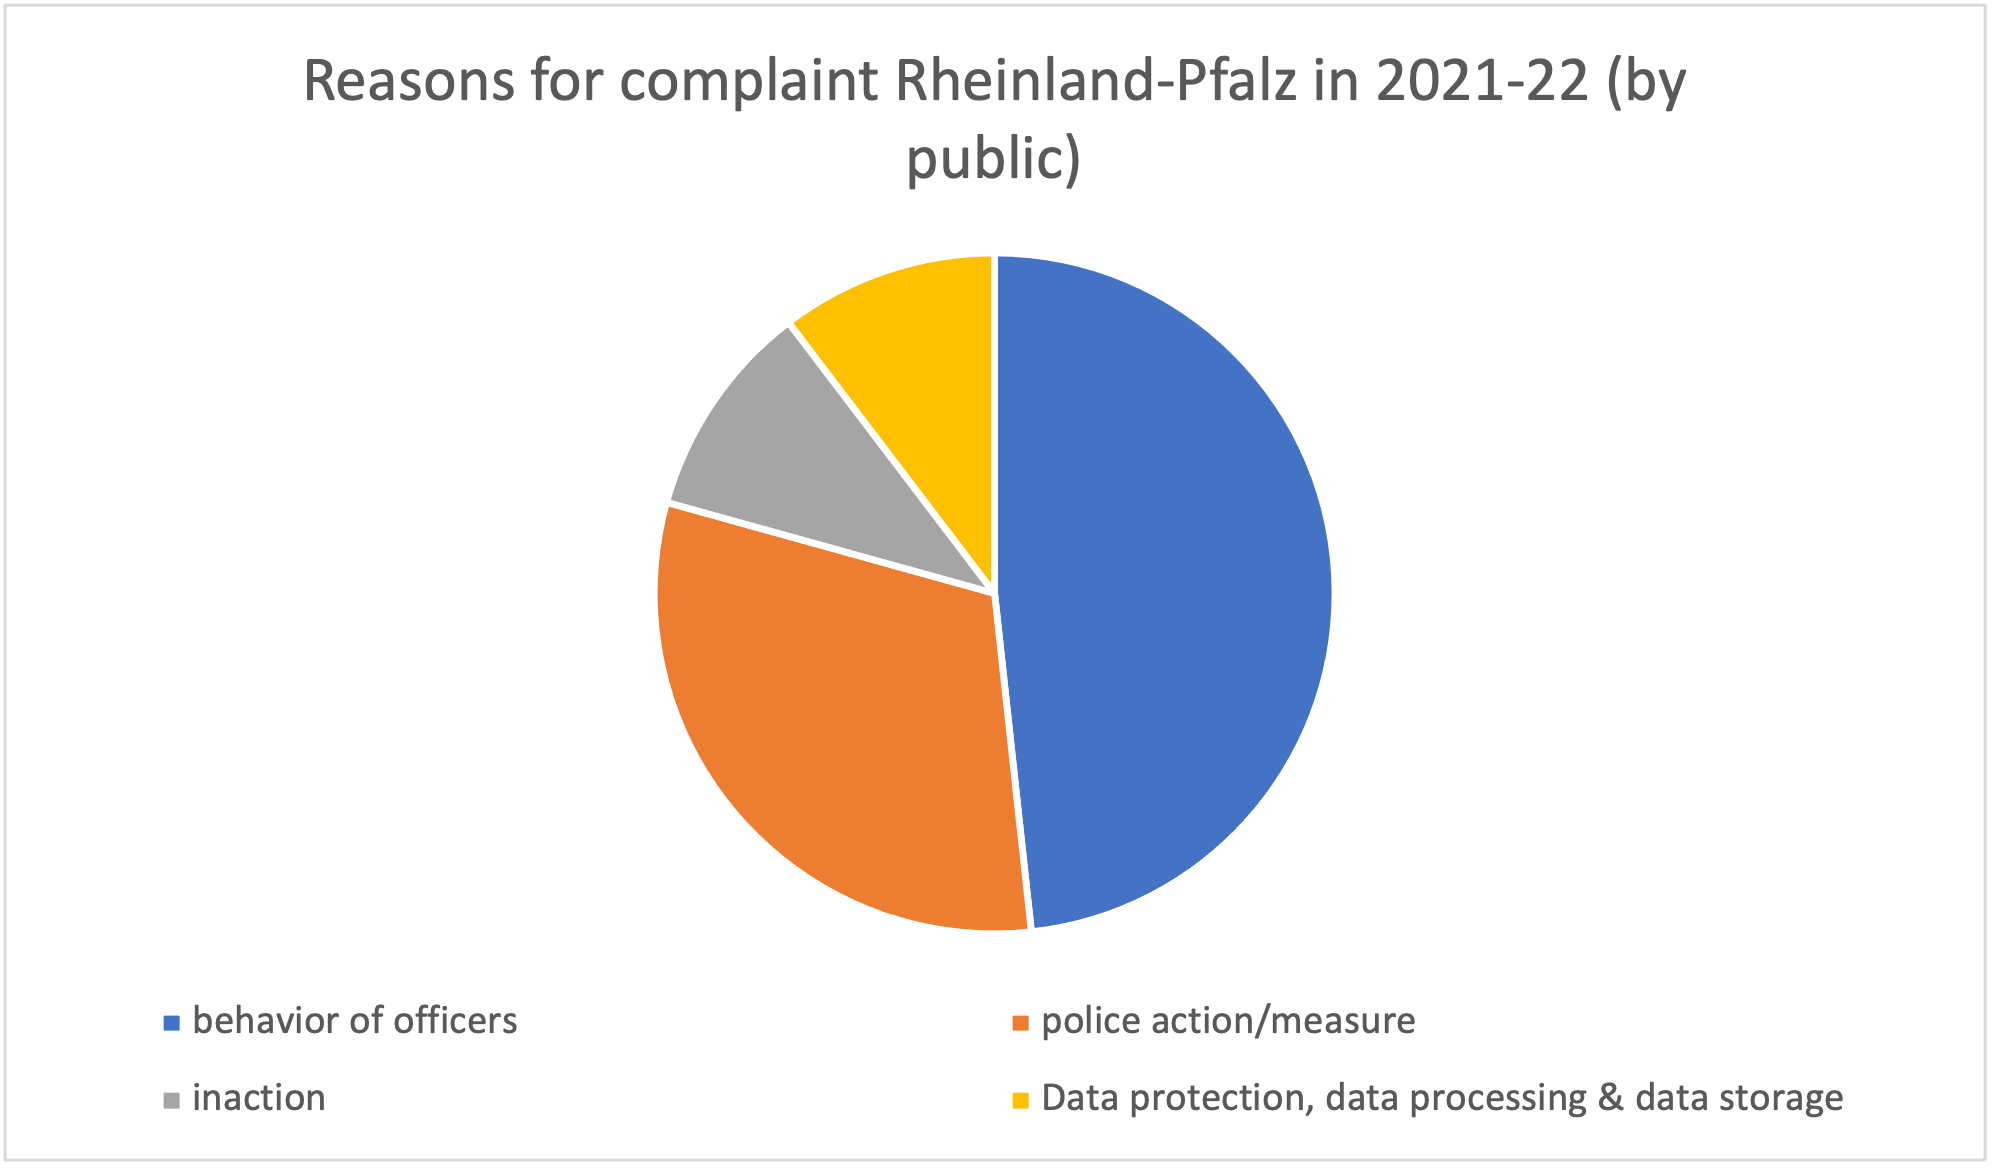 Germany InfoGraphic 2 - Reasons for complaints in Rheinland-Pfalz by type in 2021-22